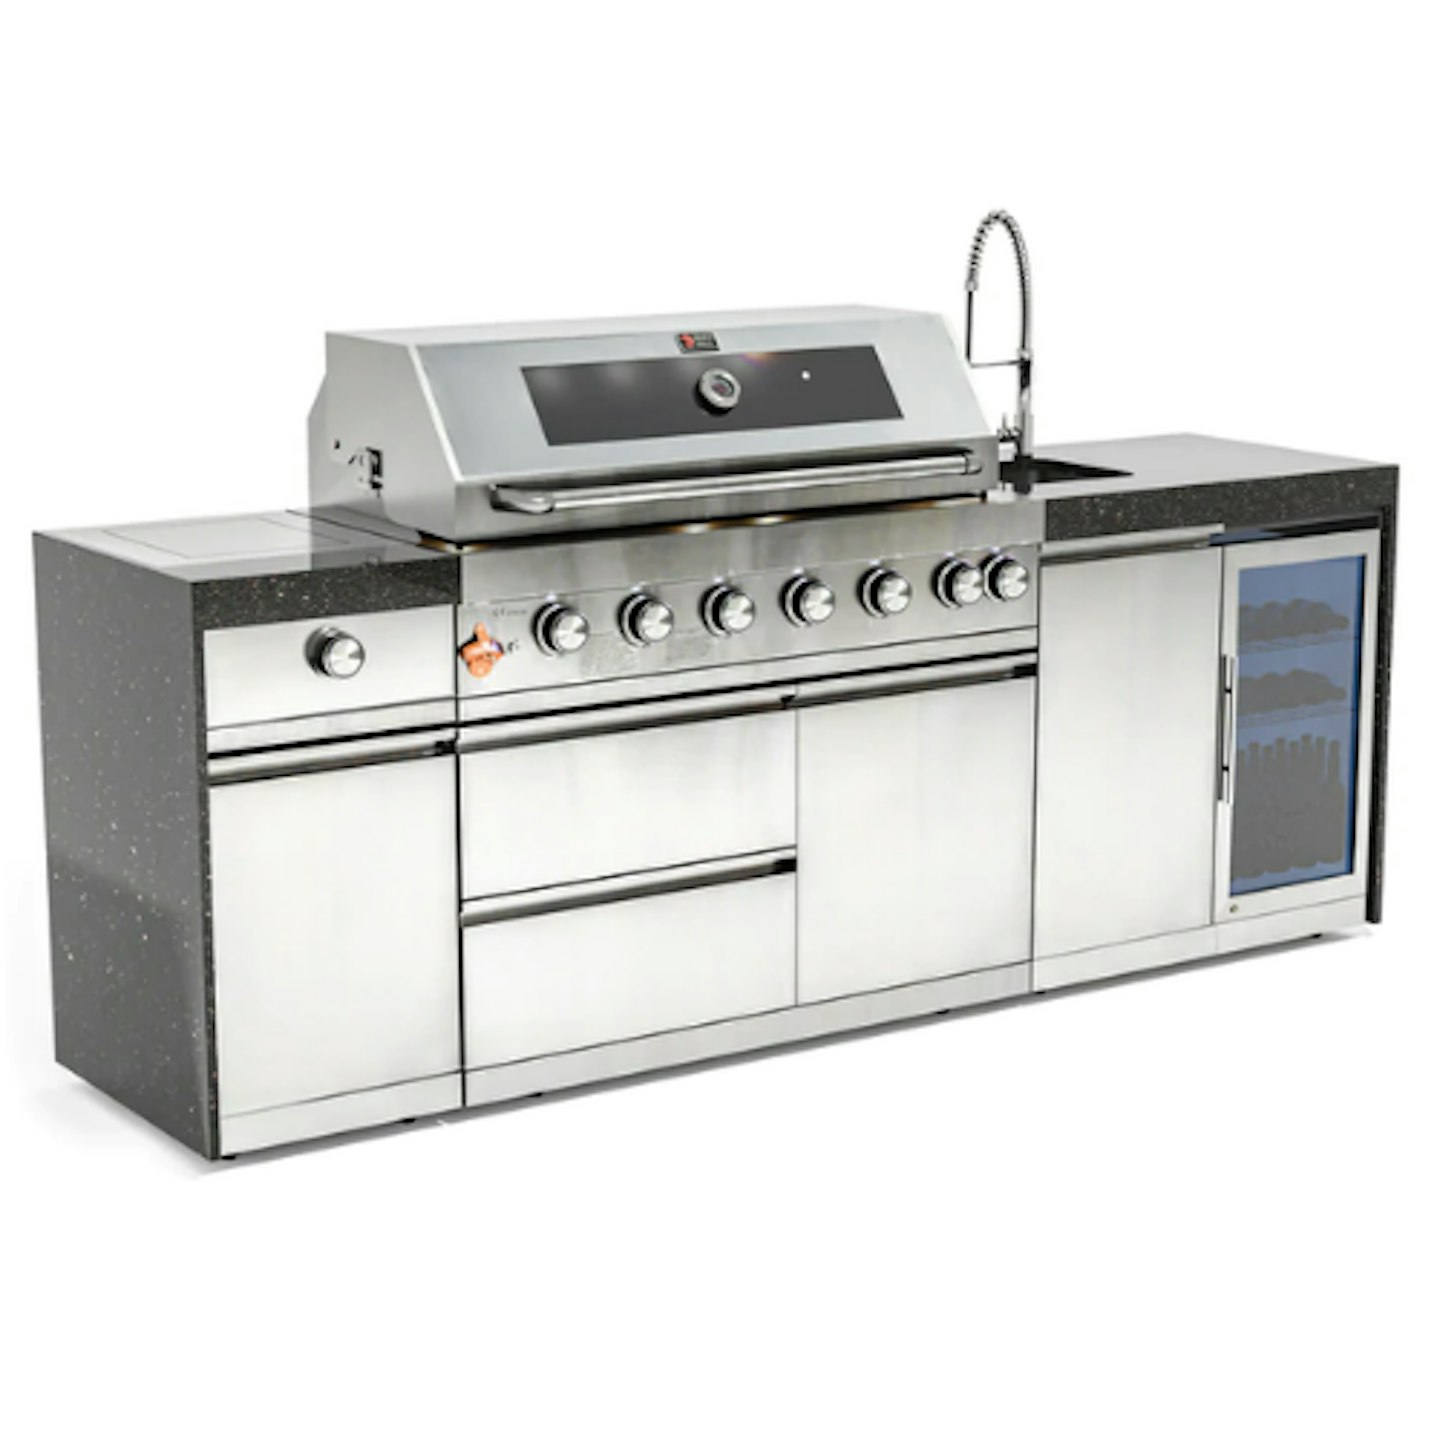 Draco Grills 6 Burner Stainless Steel Outdoor Kitchen with Sear Station, Sink and Fridge Unit